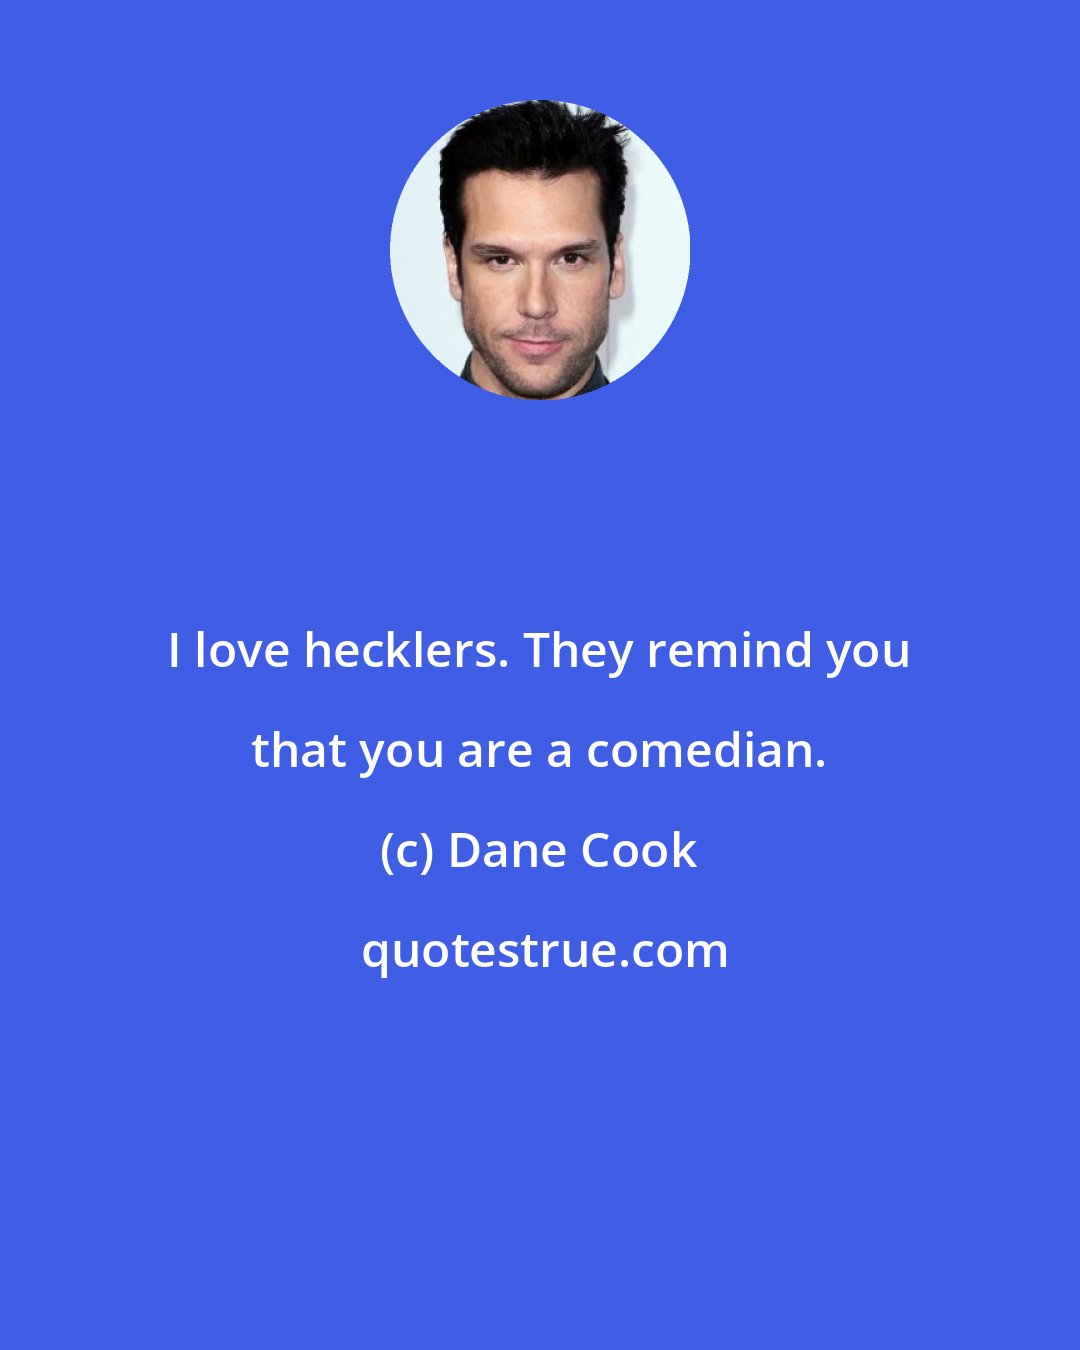 Dane Cook: I love hecklers. They remind you that you are a comedian.